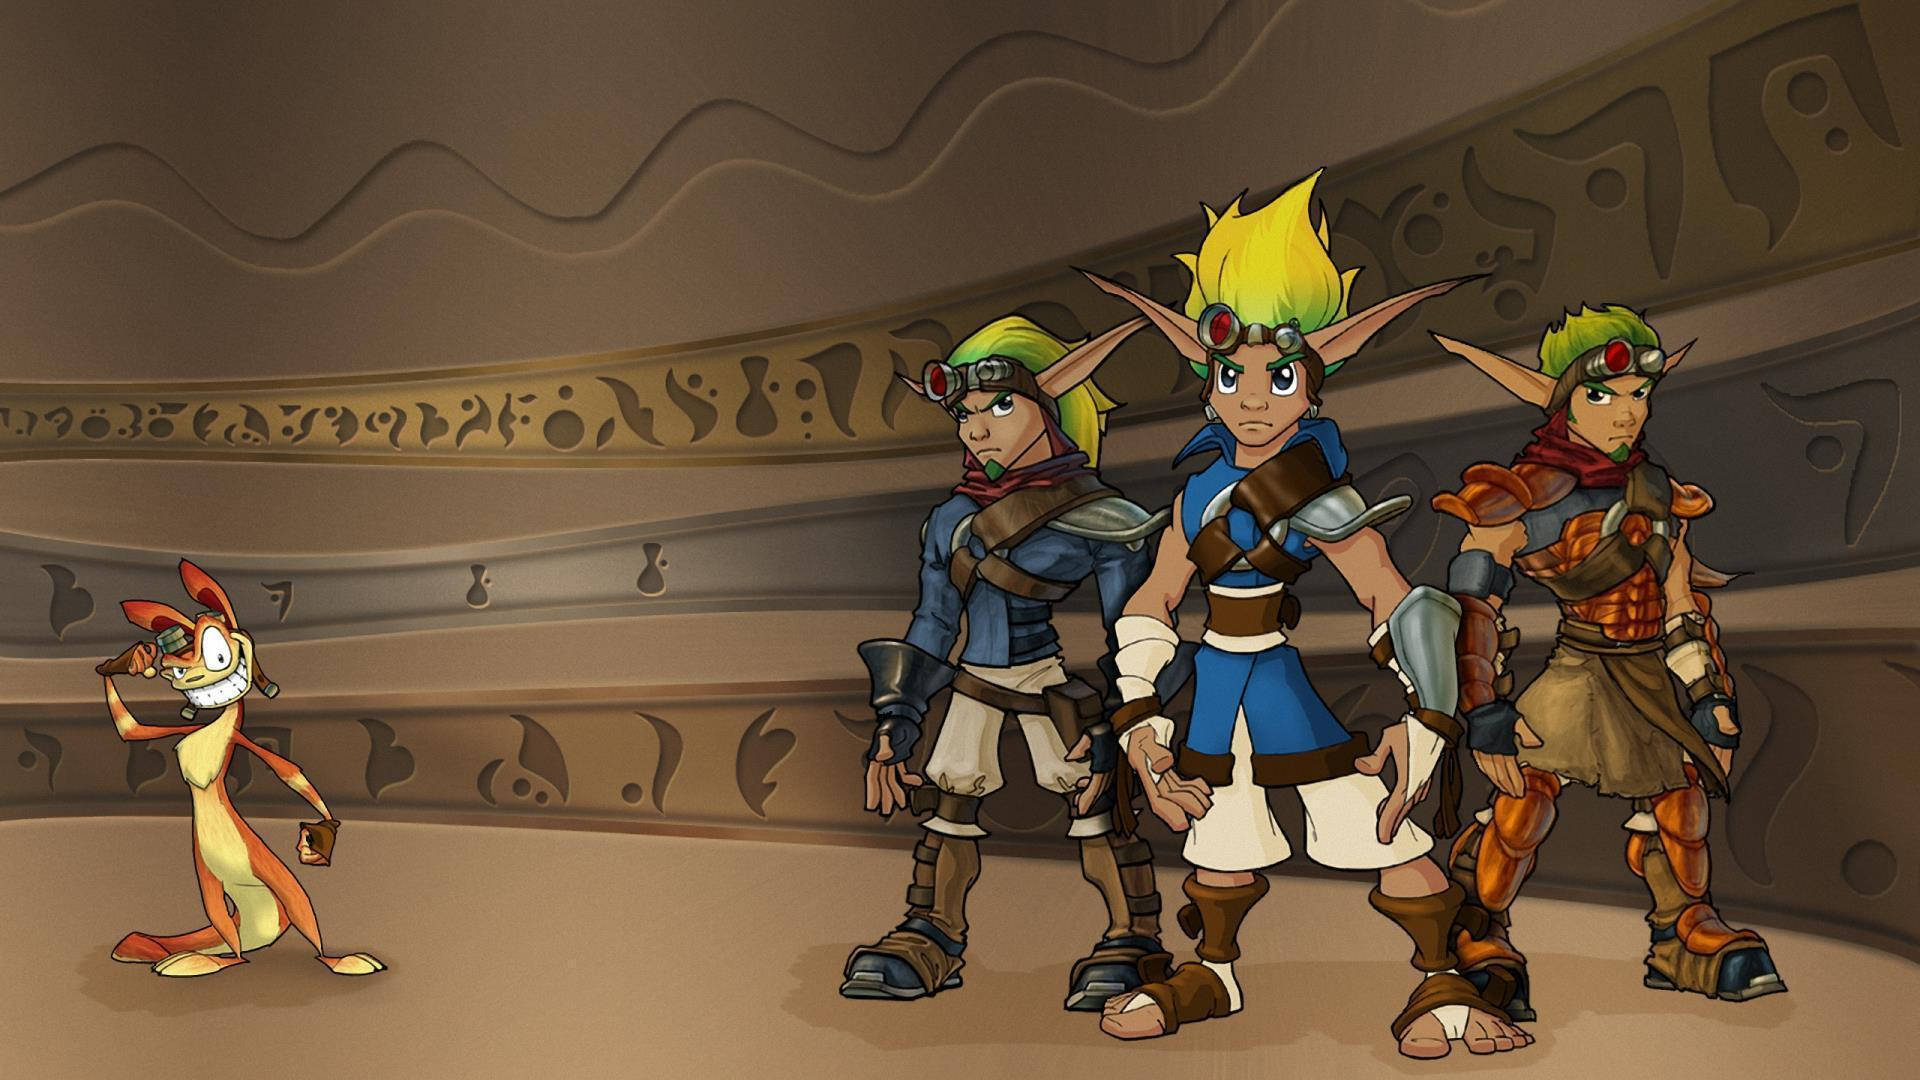 Game jack 2. Jak and Daxter 2. Jak and Daxter 3. Jack and Dexter 3. Jak and Daxter 1.